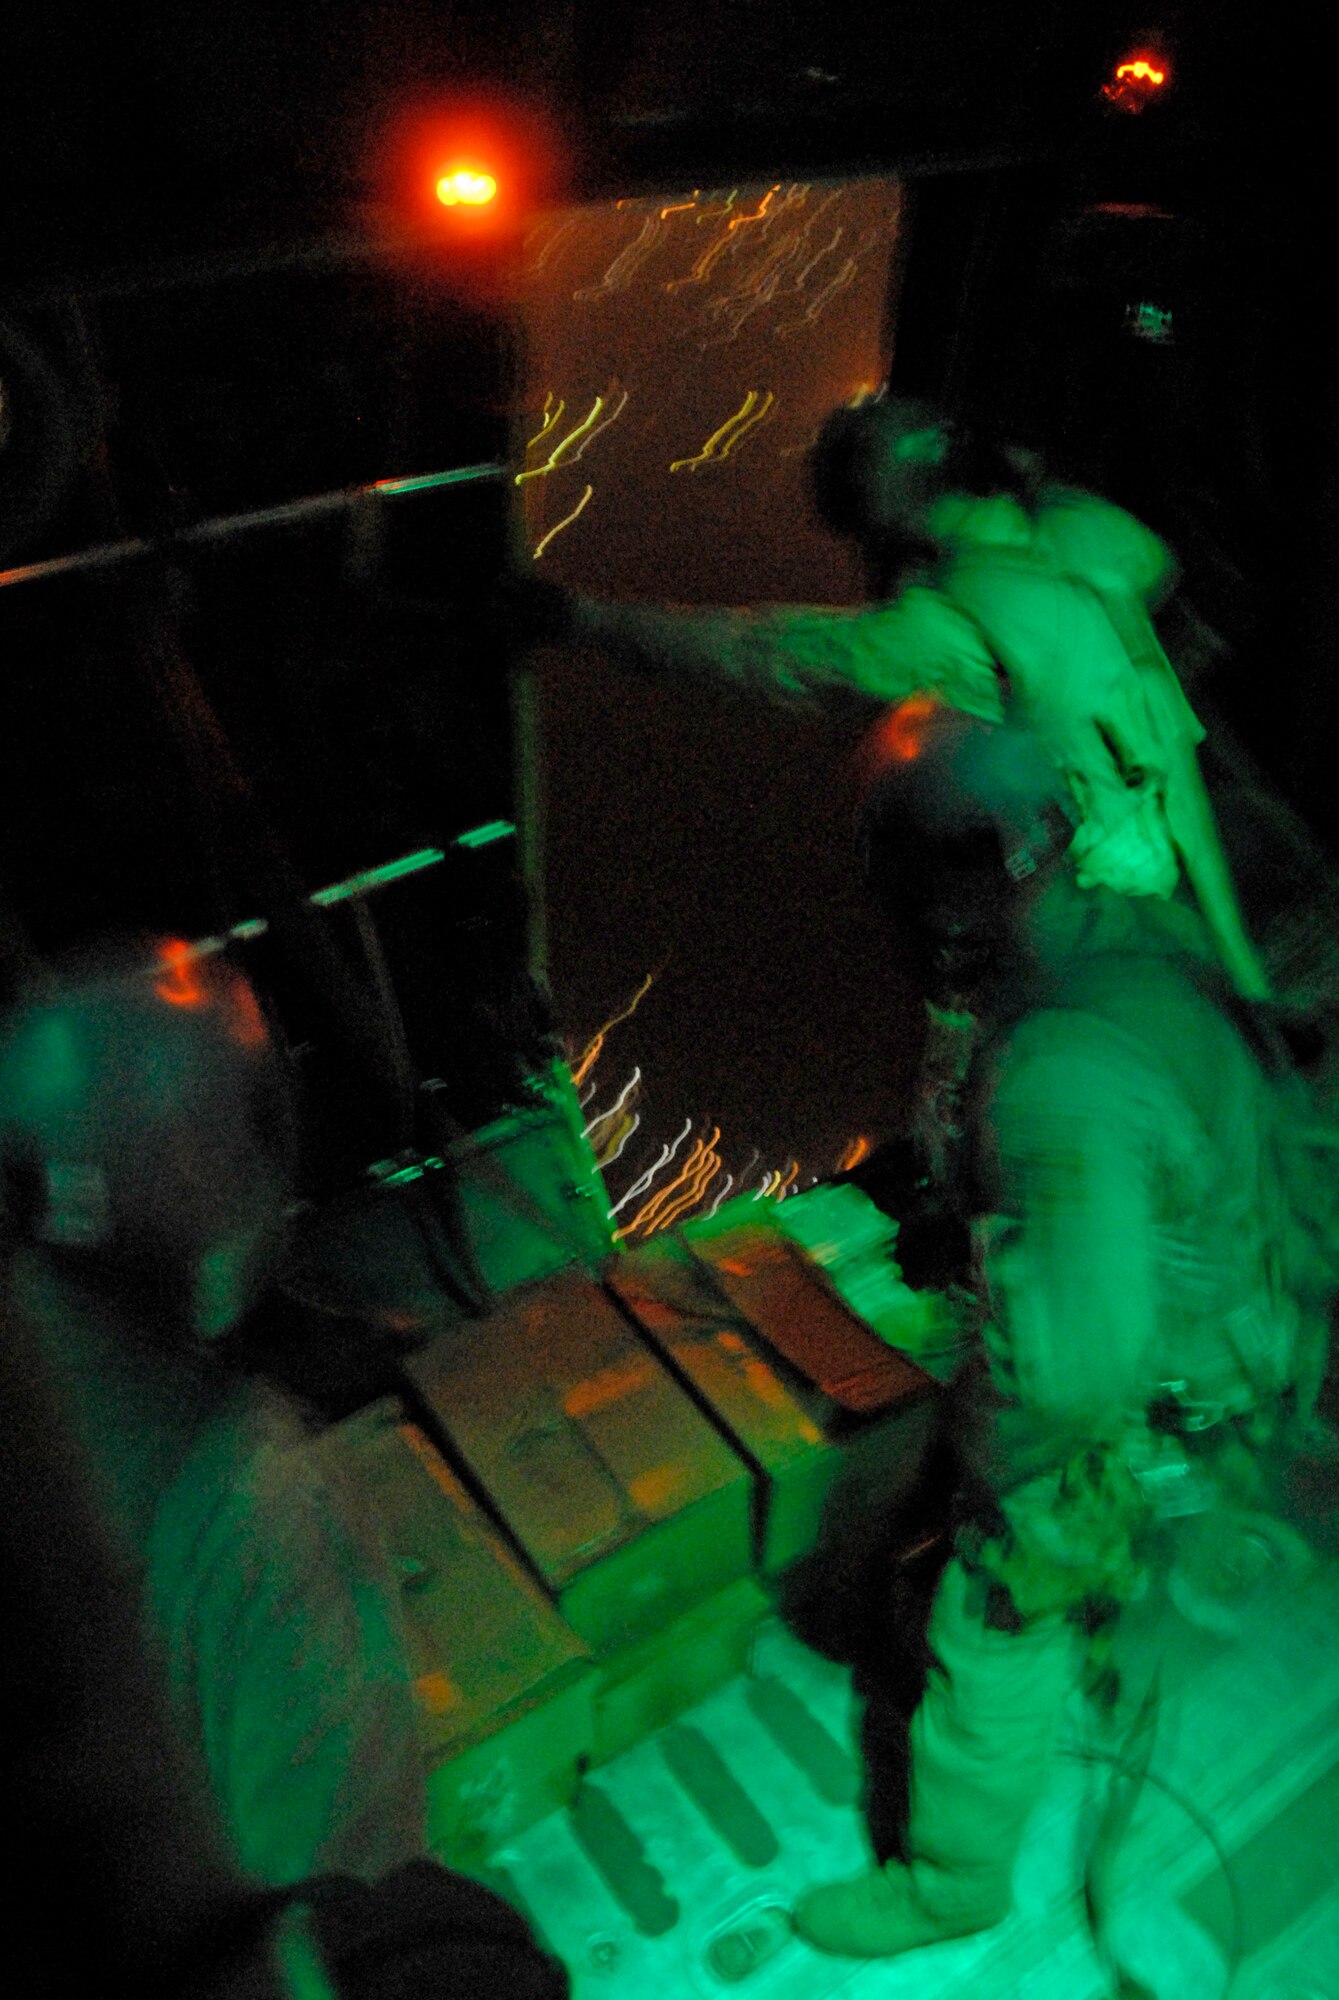 SOUTHWEST ASIA -- Aircrew members from the 737th Expeditionary Airlift Squadron deployed to an air base in the Persian Gulf Region wait for the light above the right rear troop door to turn green before they push out several hundred thousand leaflets over an Iraqi city in May 2008. The three-person team is comprised of 1st Lt. Justin Fitzpatrick (left) and Senior Airman Joel Pfaff (center), who fill the roles as feeders to Staff Sgt. Gabriel Molanders (right), the kicker on the team who ensures the leaflets get out the door and over the target area. All three aircrew members are deployed from Dyess Air Force Base, Texas. (U.S. Air Force photo/Tech. Sgt. Michael O’Connor)